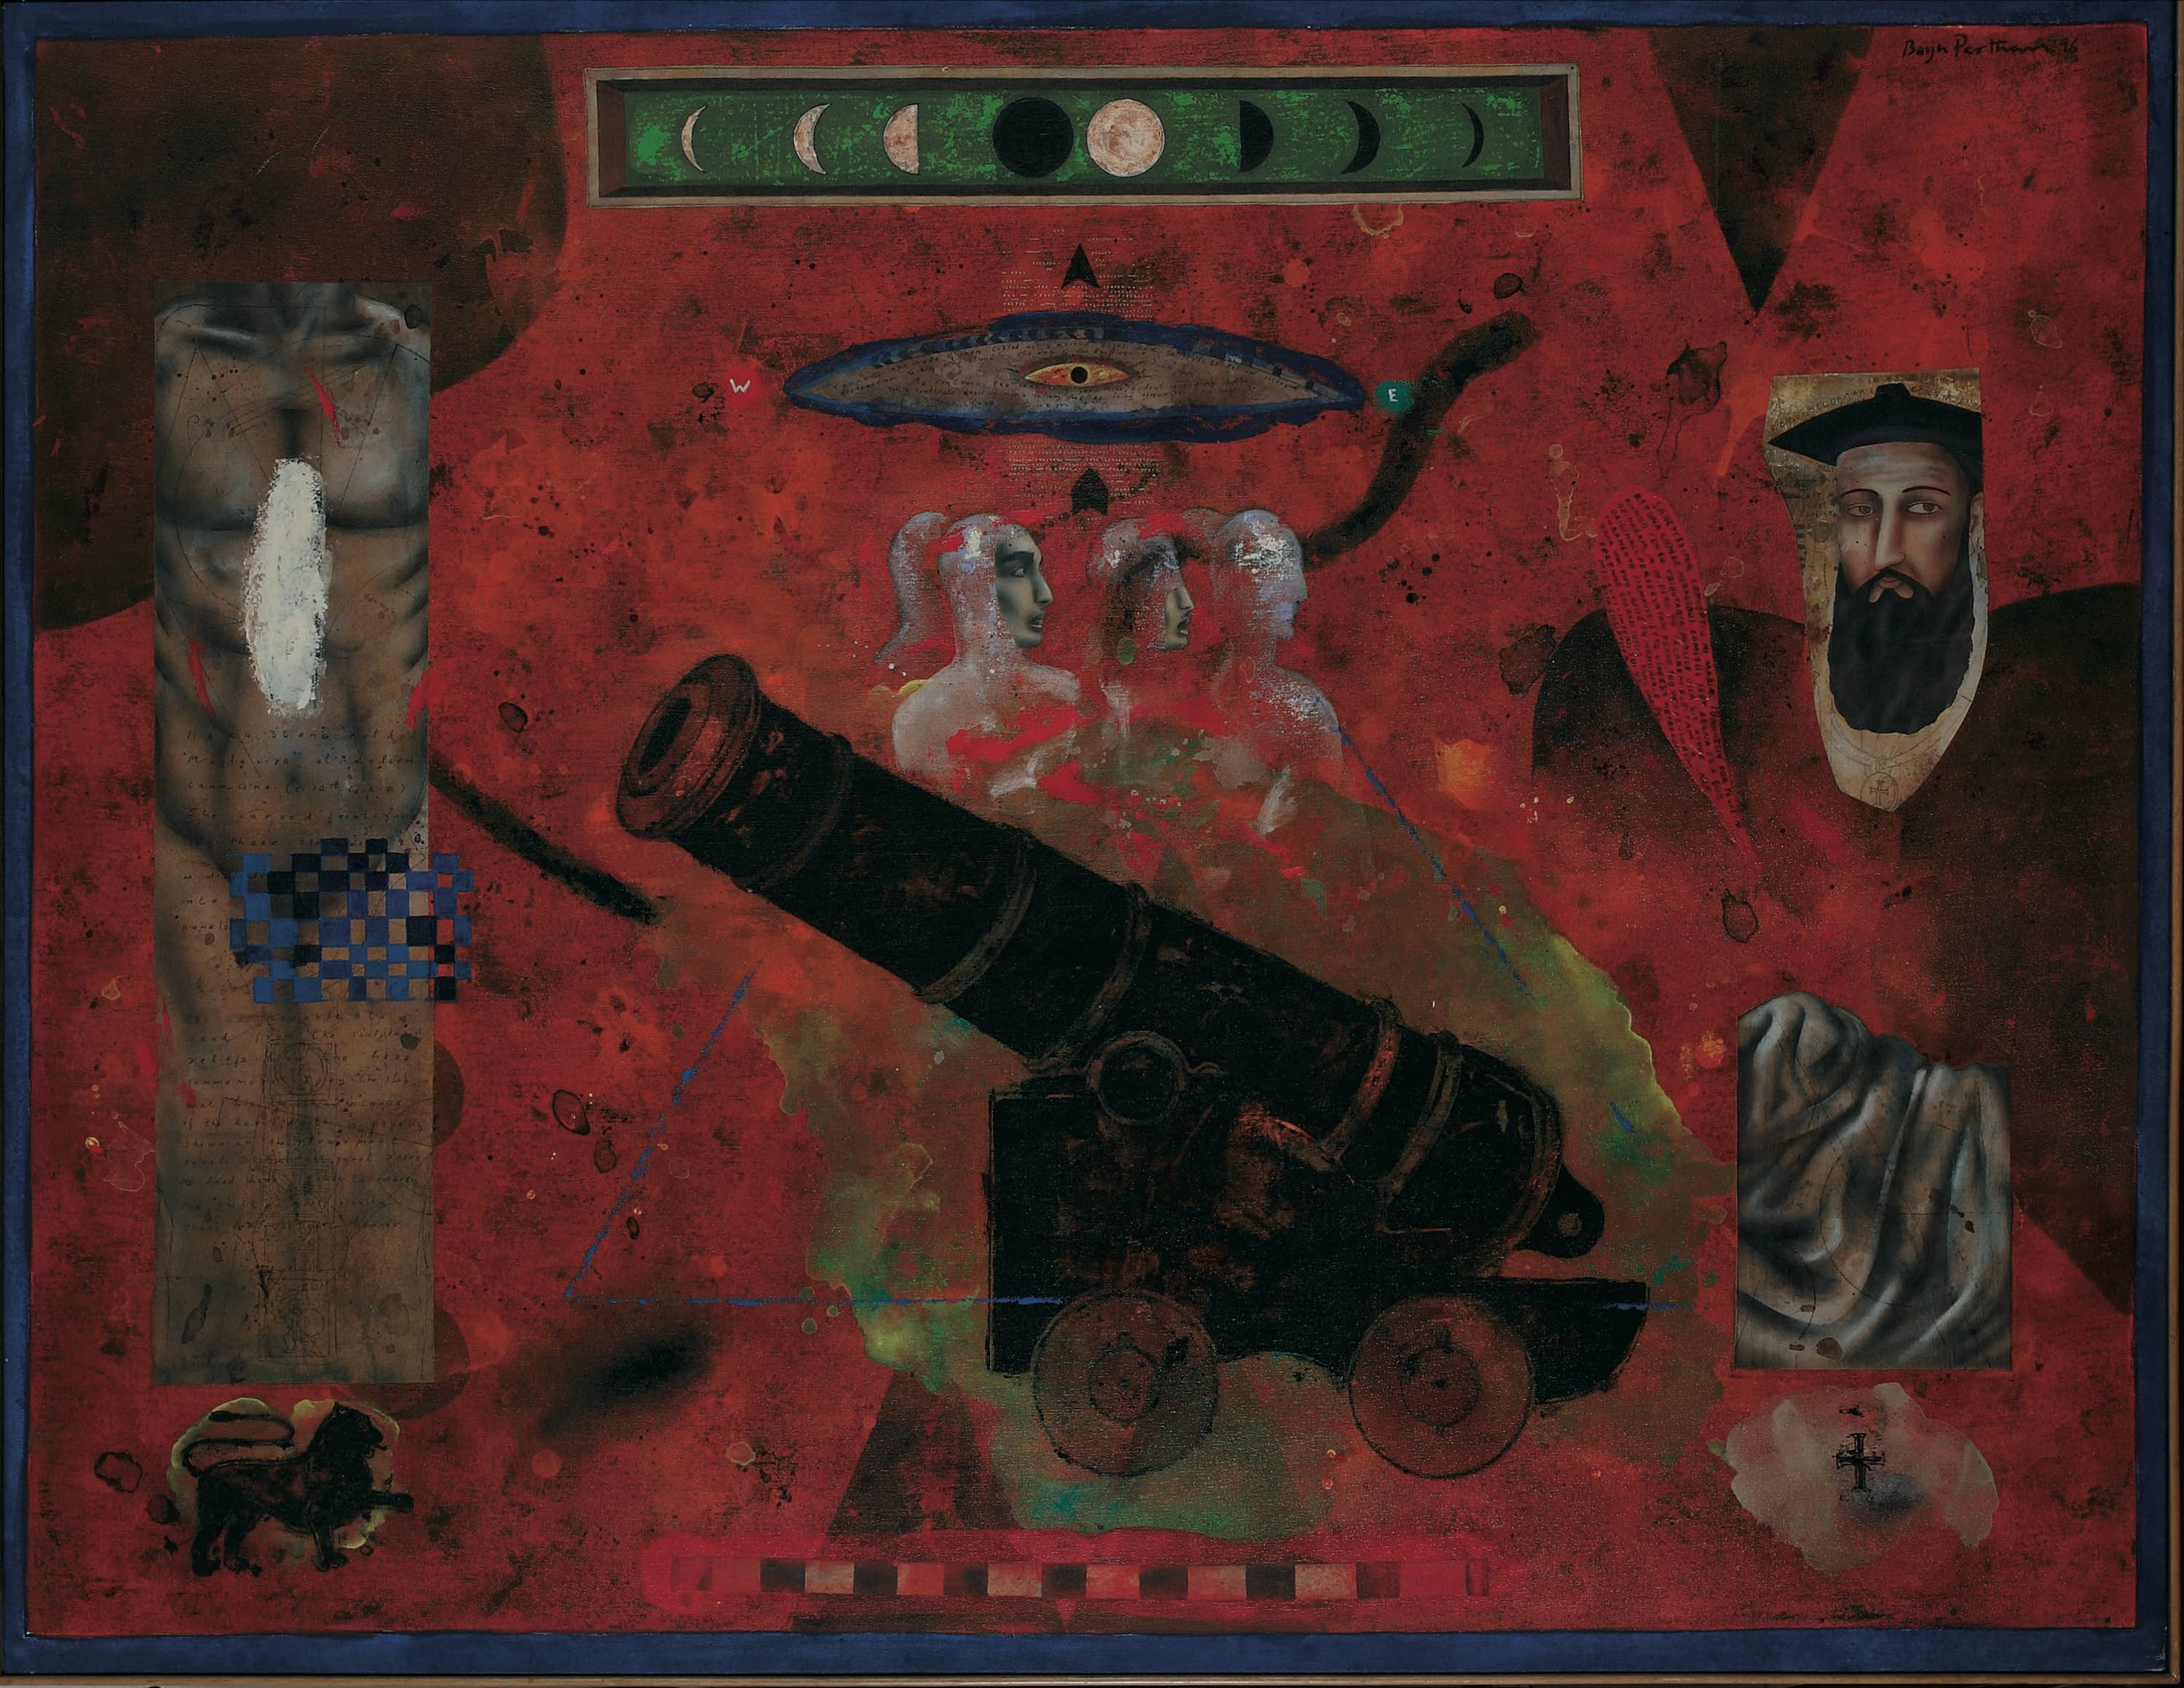 Cannon - Time And History, 1996